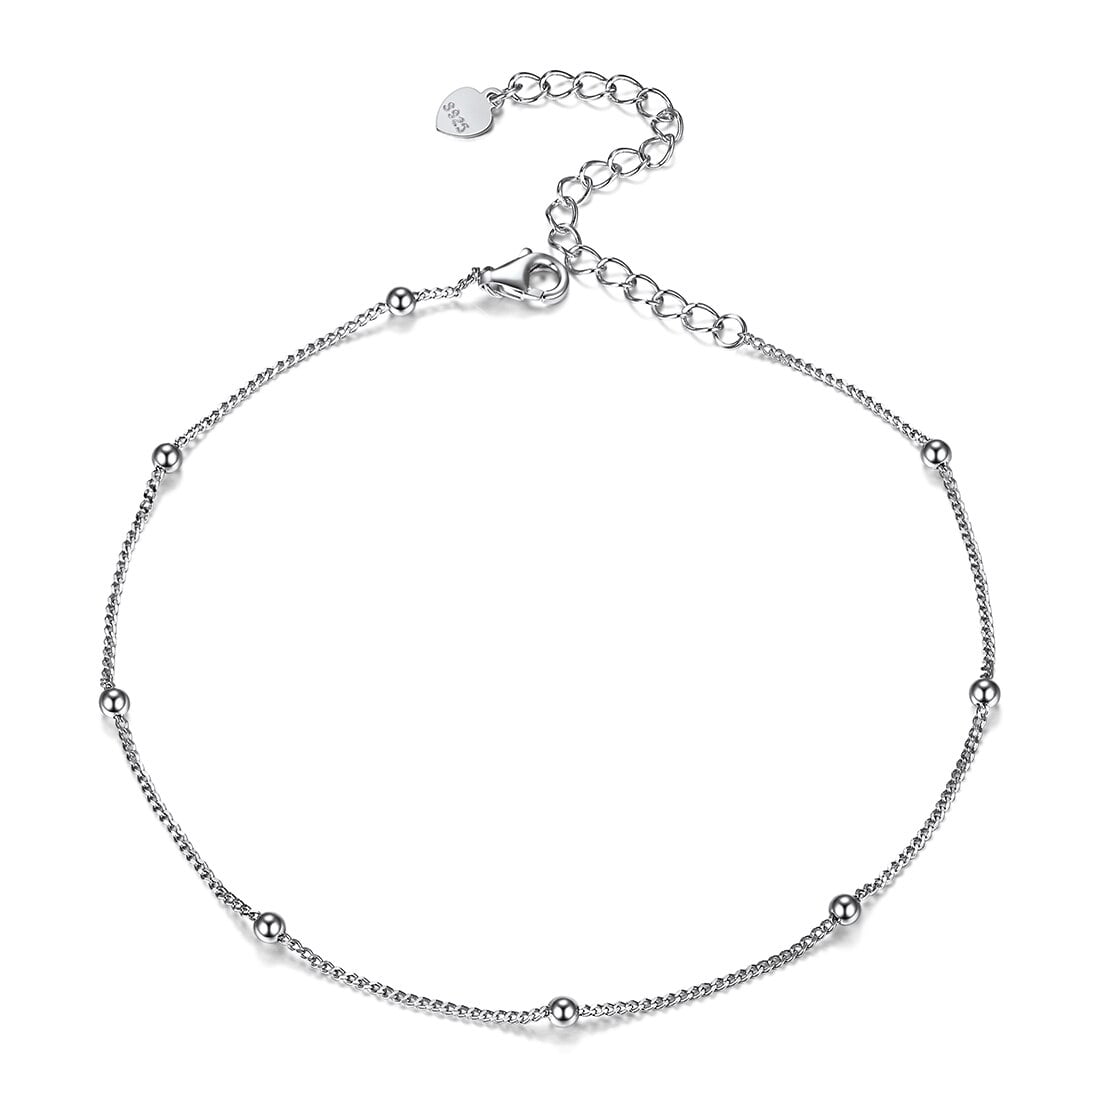 ChicSilver Sterling Silver Beads Anklets Foot Chain Ankle Bracelet ...